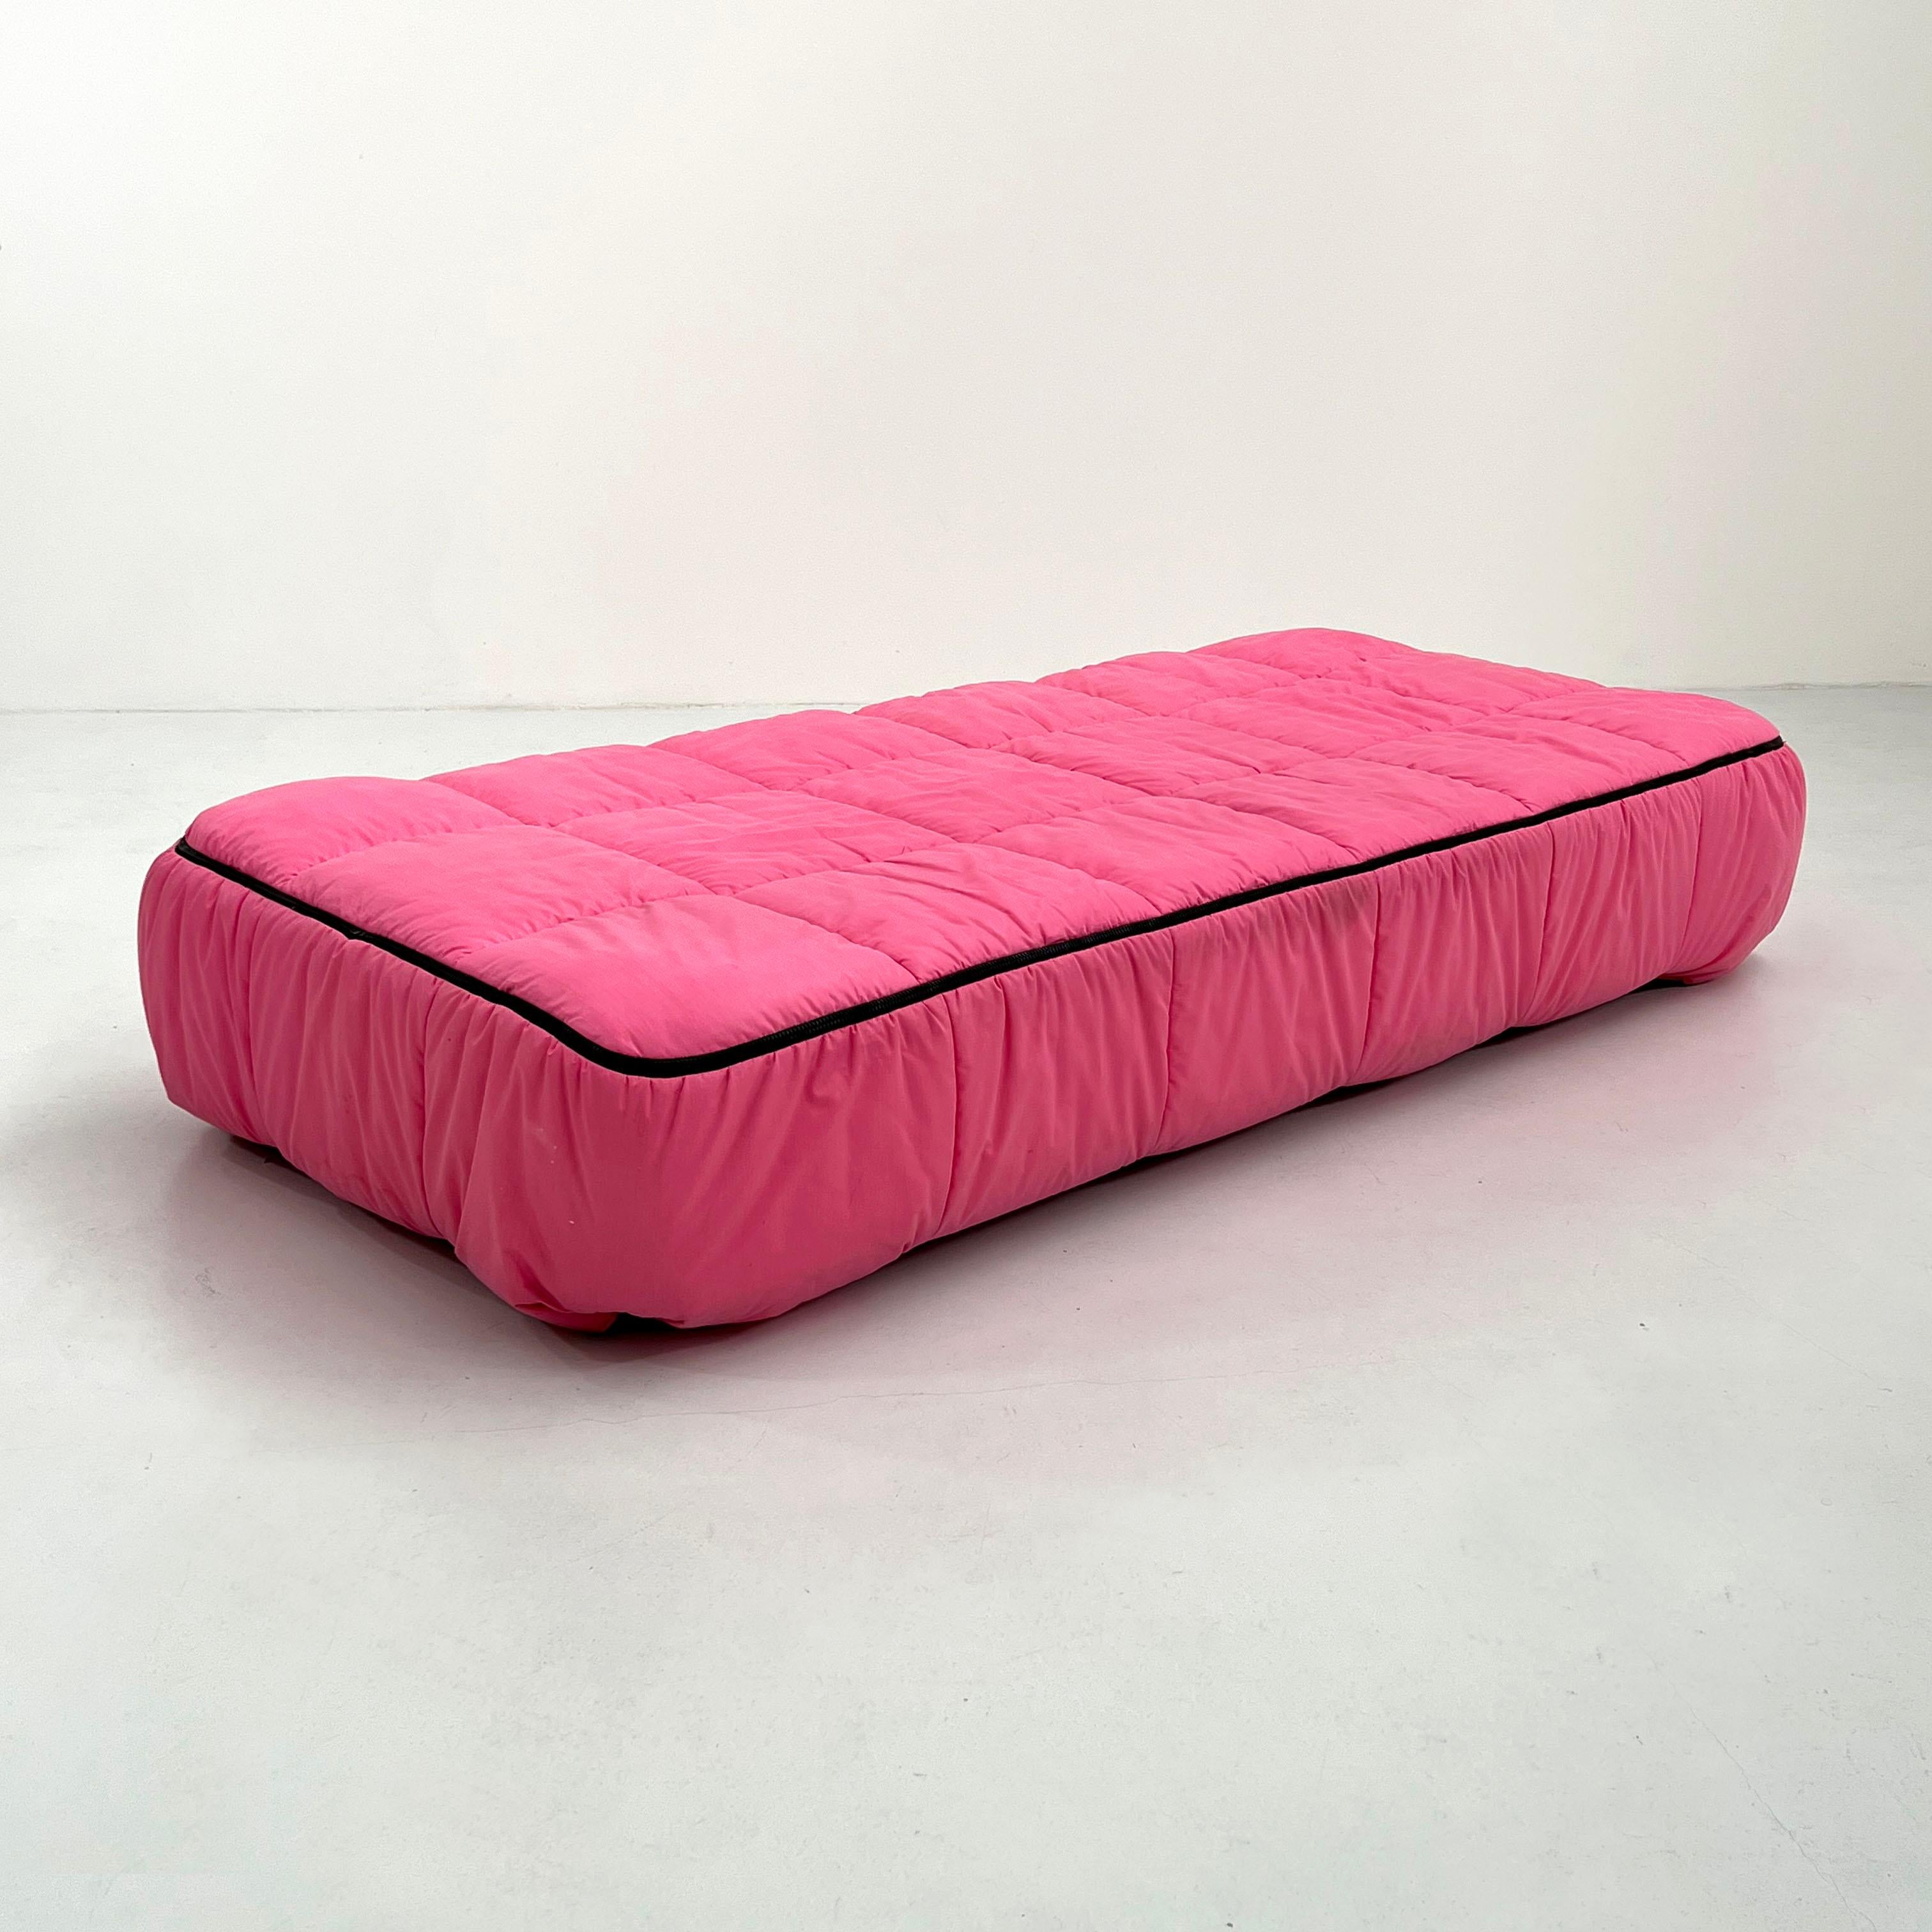 Designer - Cini Boeri 
Producer - Arflex
Design Period - Seventies
Measurements - Width 104 cm x Depth 215 cm x Height 40 cm 
Materials - Fabric
Color - Pink
Comments - Light wear consistent with age and use. Removable covering. New never used